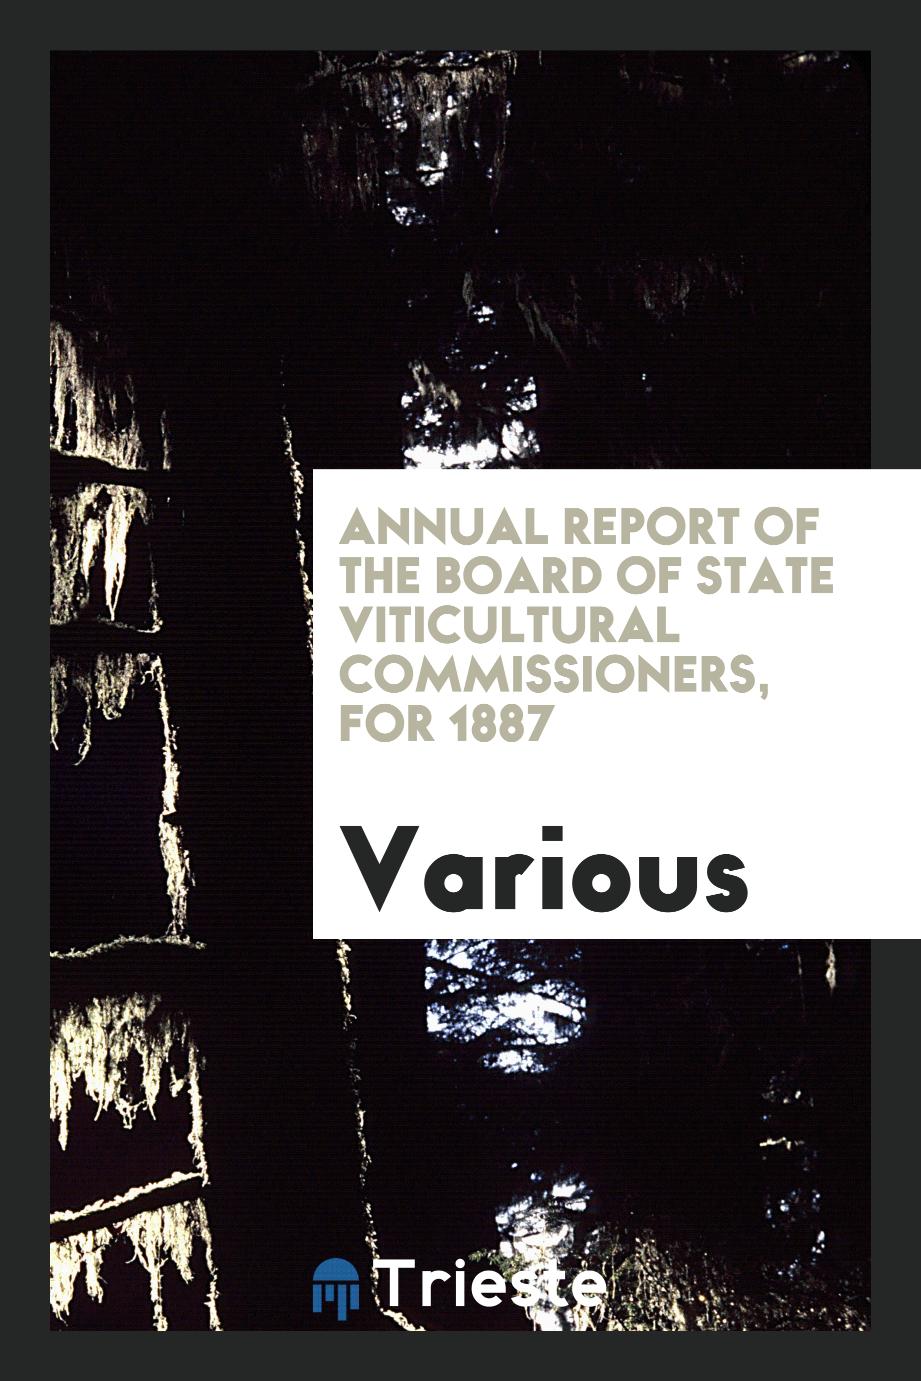 Annual Report of the Board of State Viticultural Commissioners, for 1887